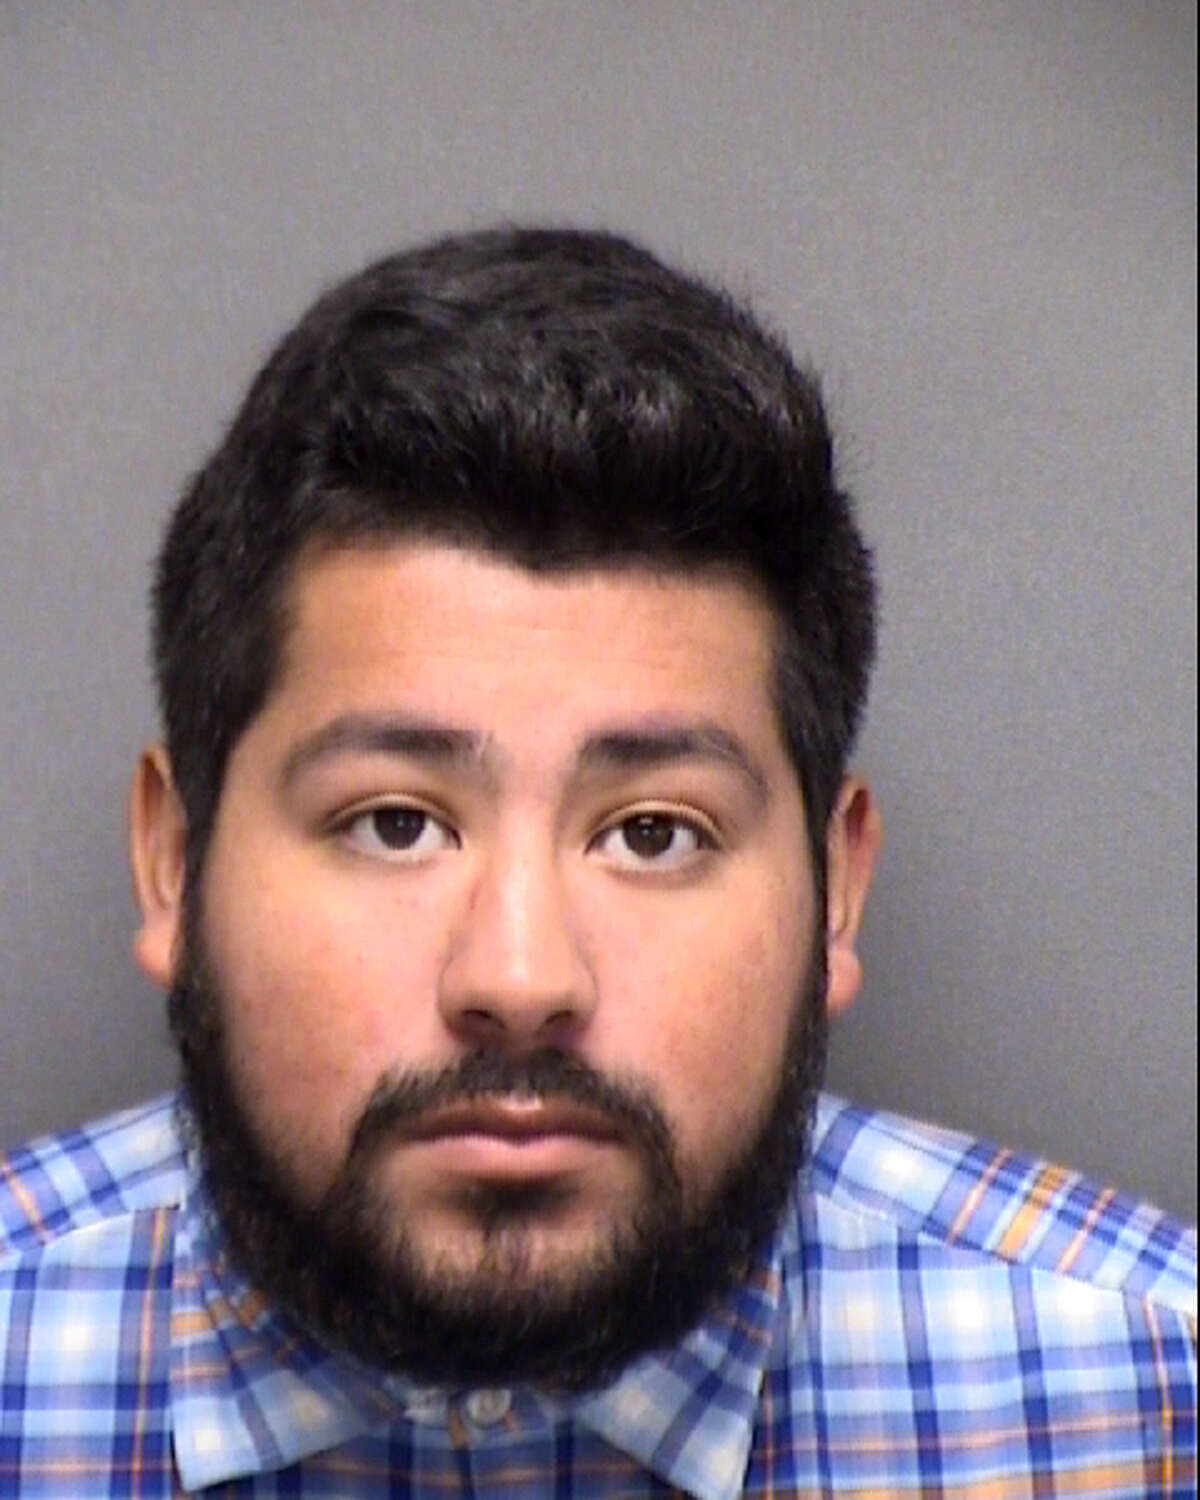 Jesus Ruiz Sauceda was charged with intoxication manslaughter on June 9, 2019.